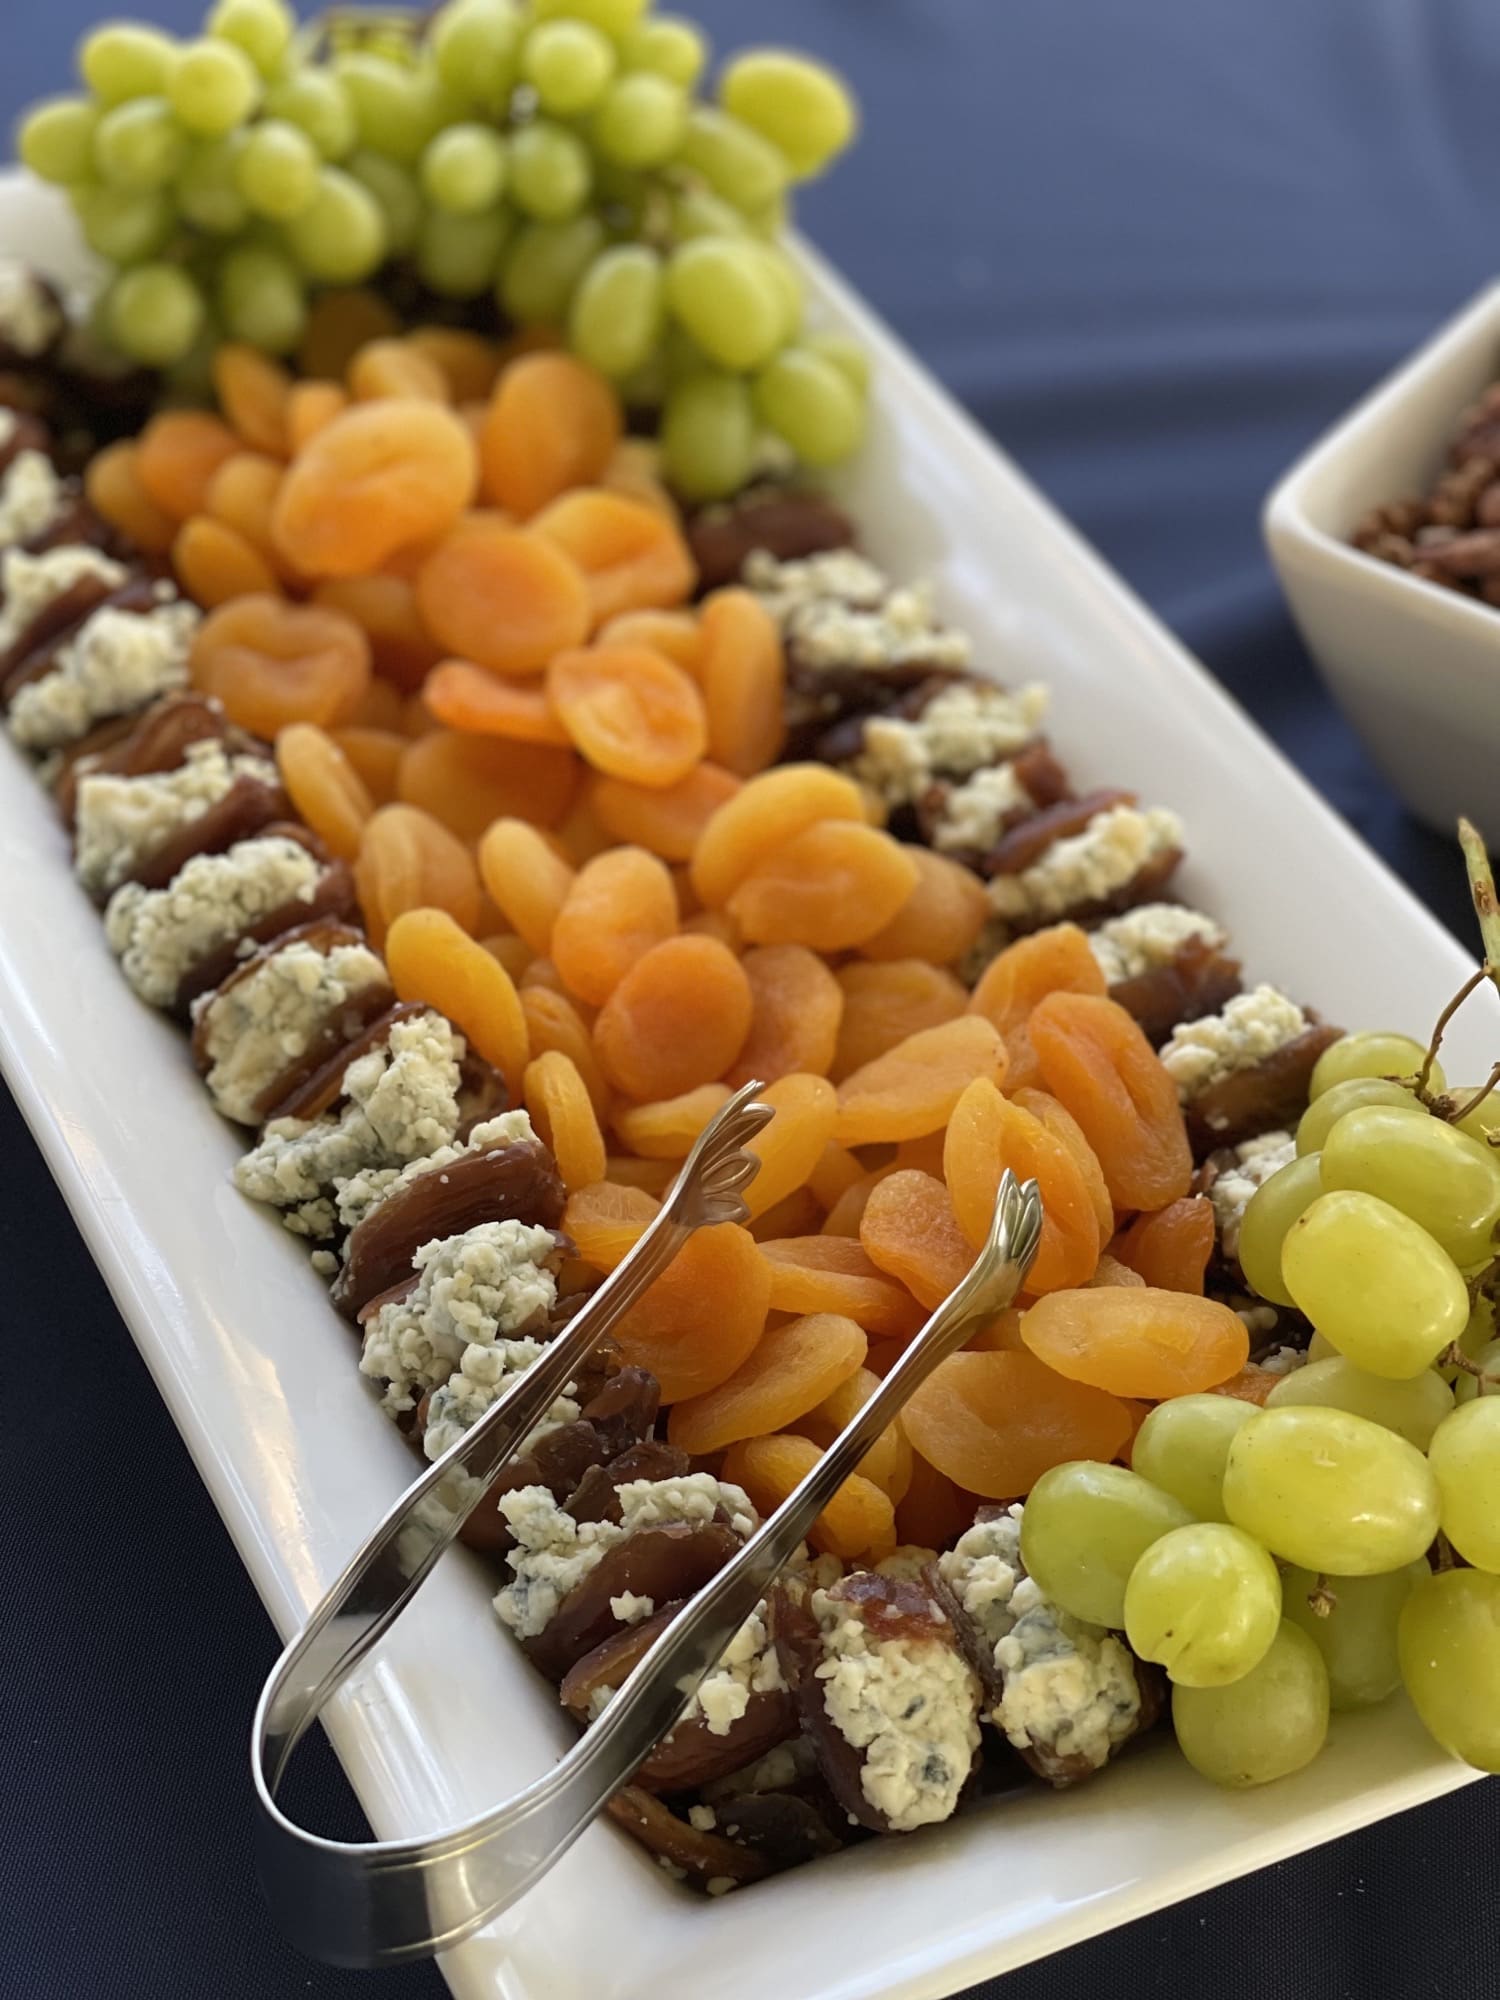 Apricots, grapes and cheese